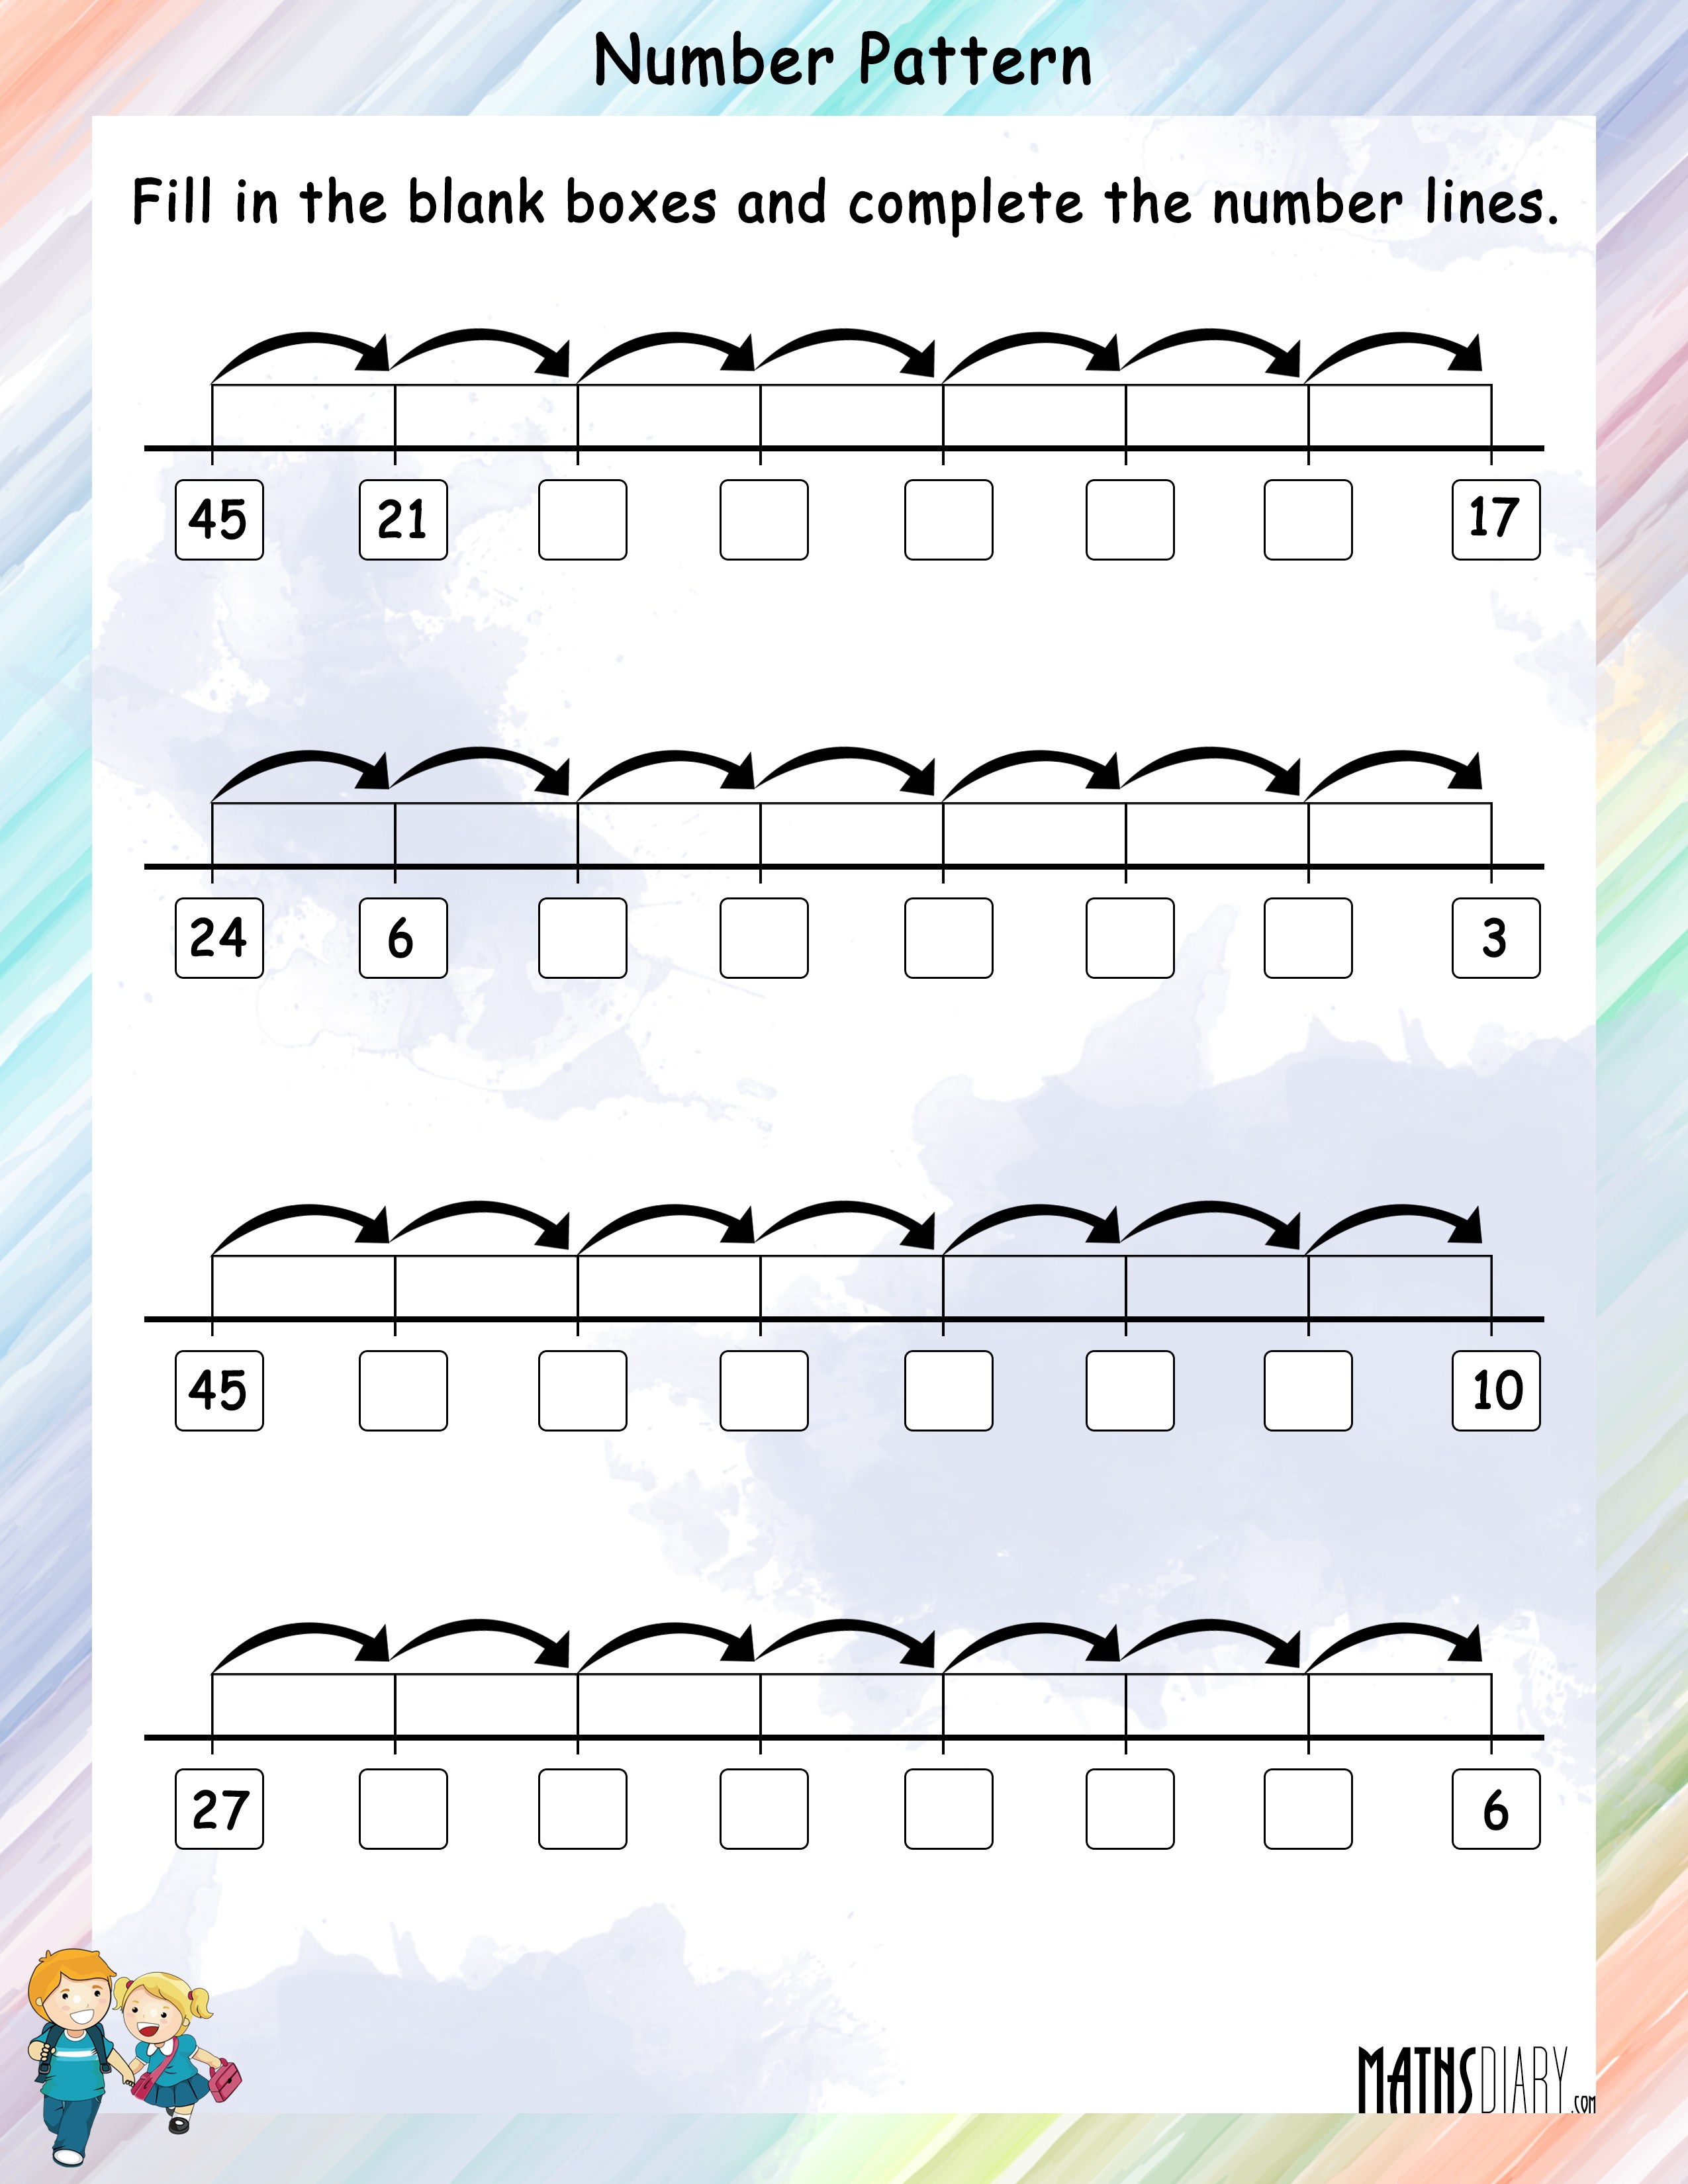 Number Pattern on a Number Line - Math Worksheets - MathsDiary.com